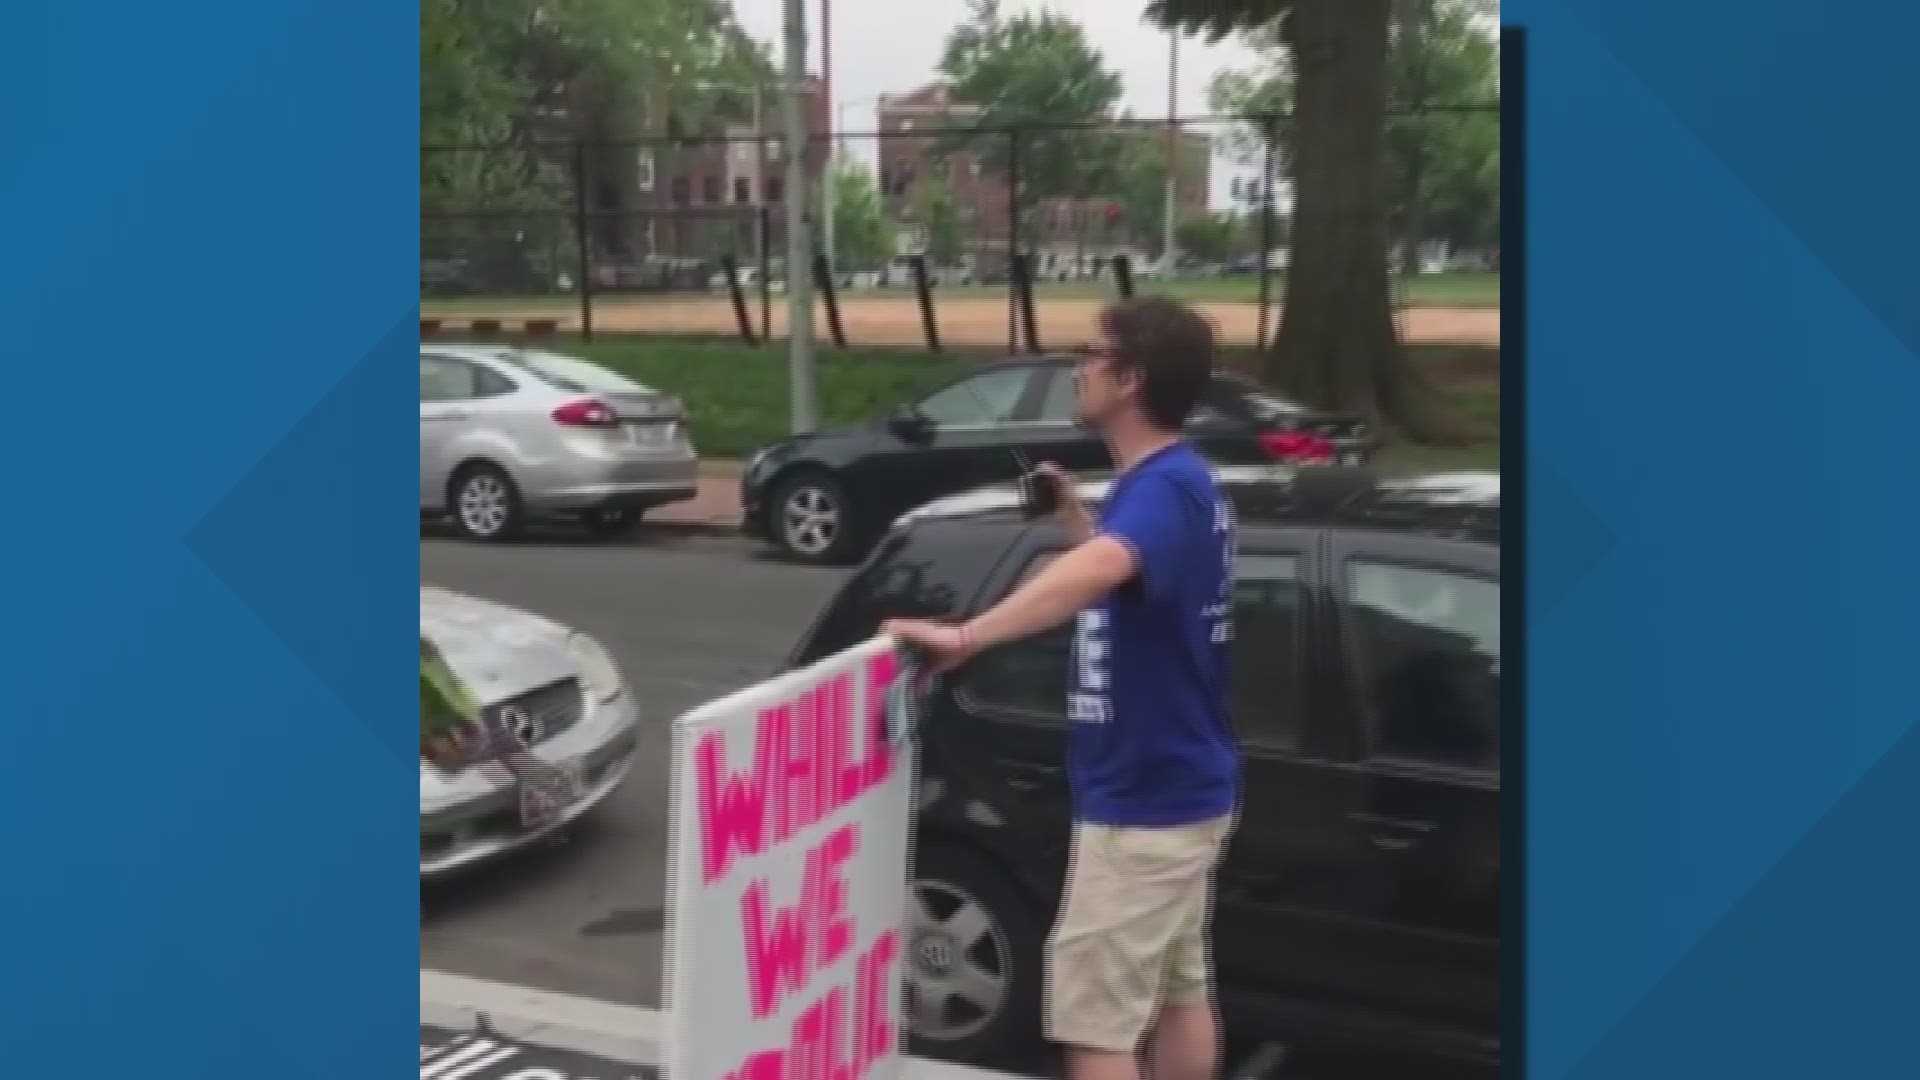 Anti-abortion activists protesting outside of schools